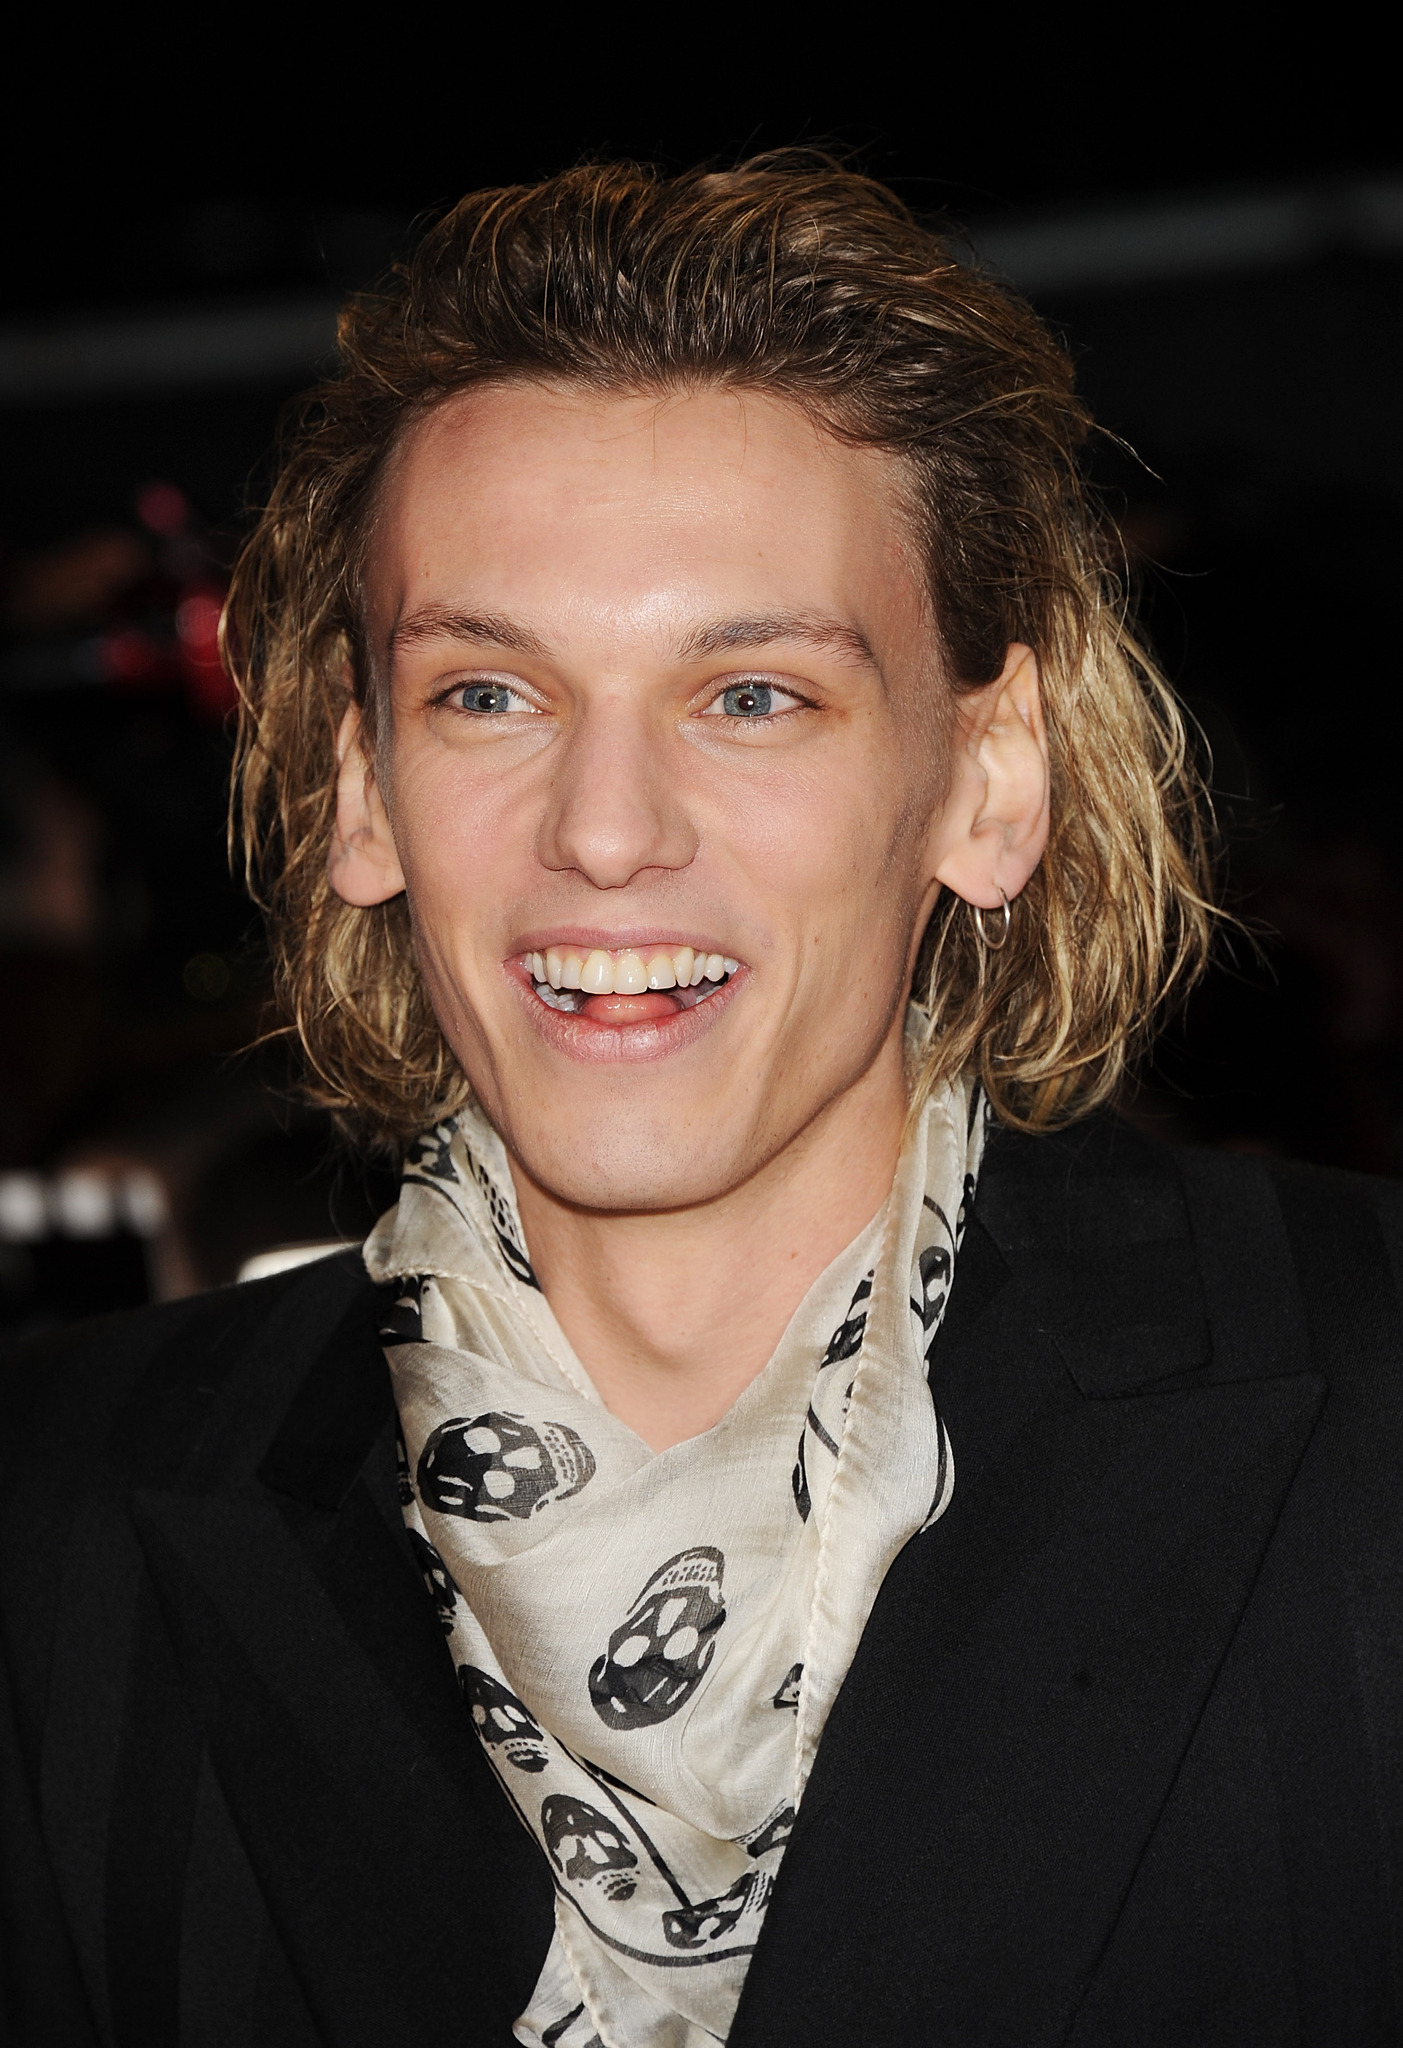 Who Did Jamie Campbell Bower Play In Harry Potter